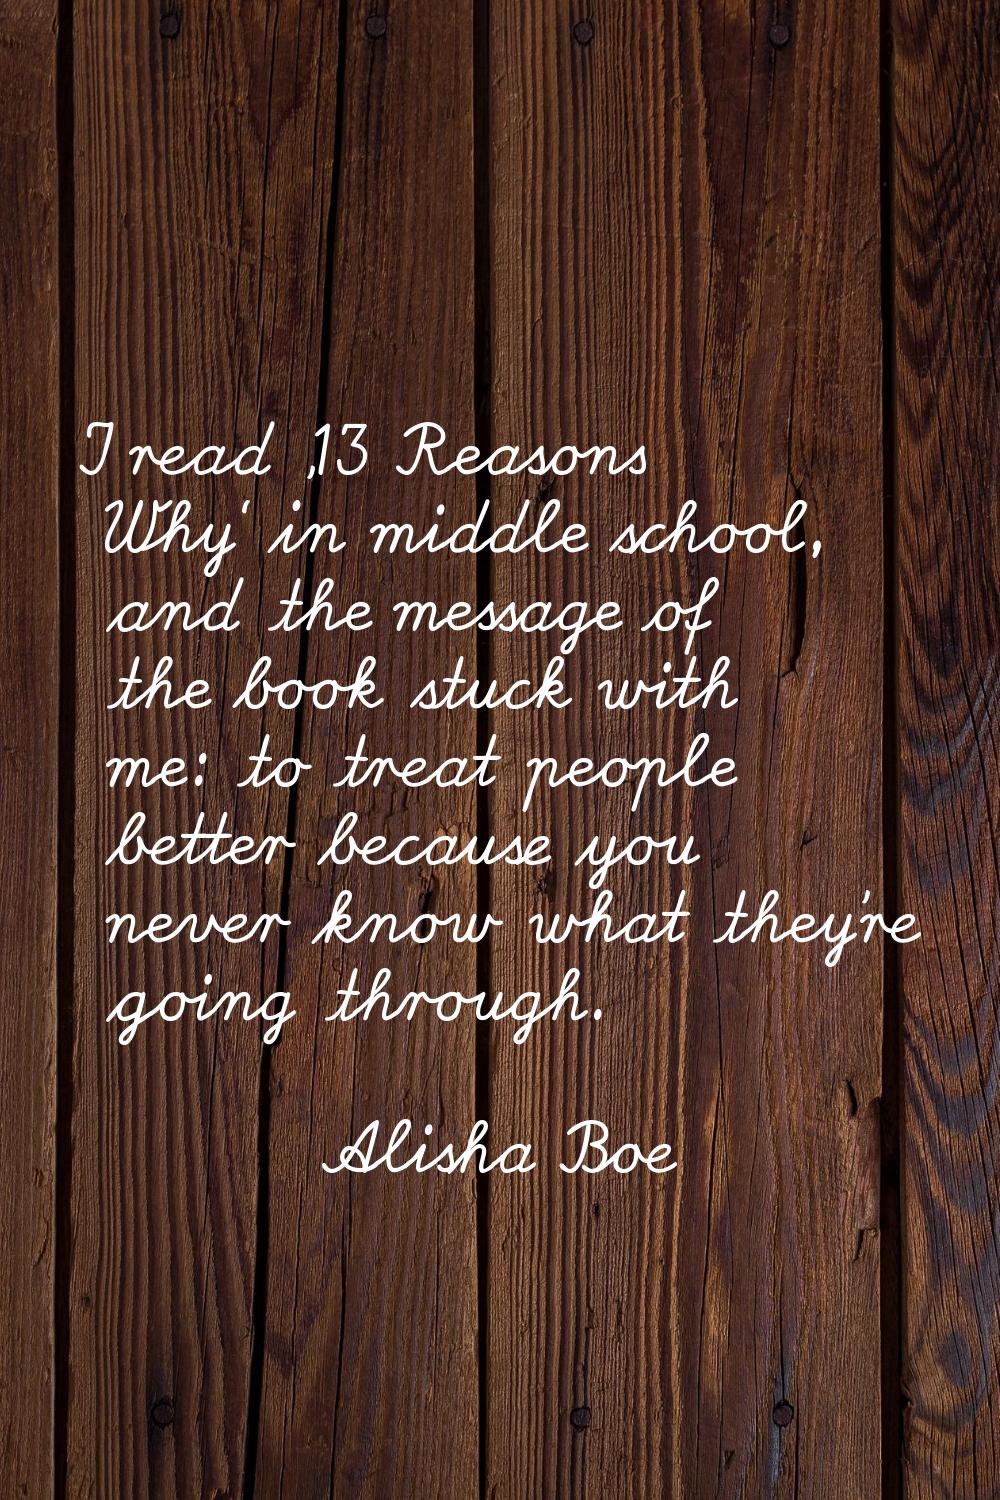 I read '13 Reasons Why' in middle school, and the message of the book stuck with me: to treat peopl